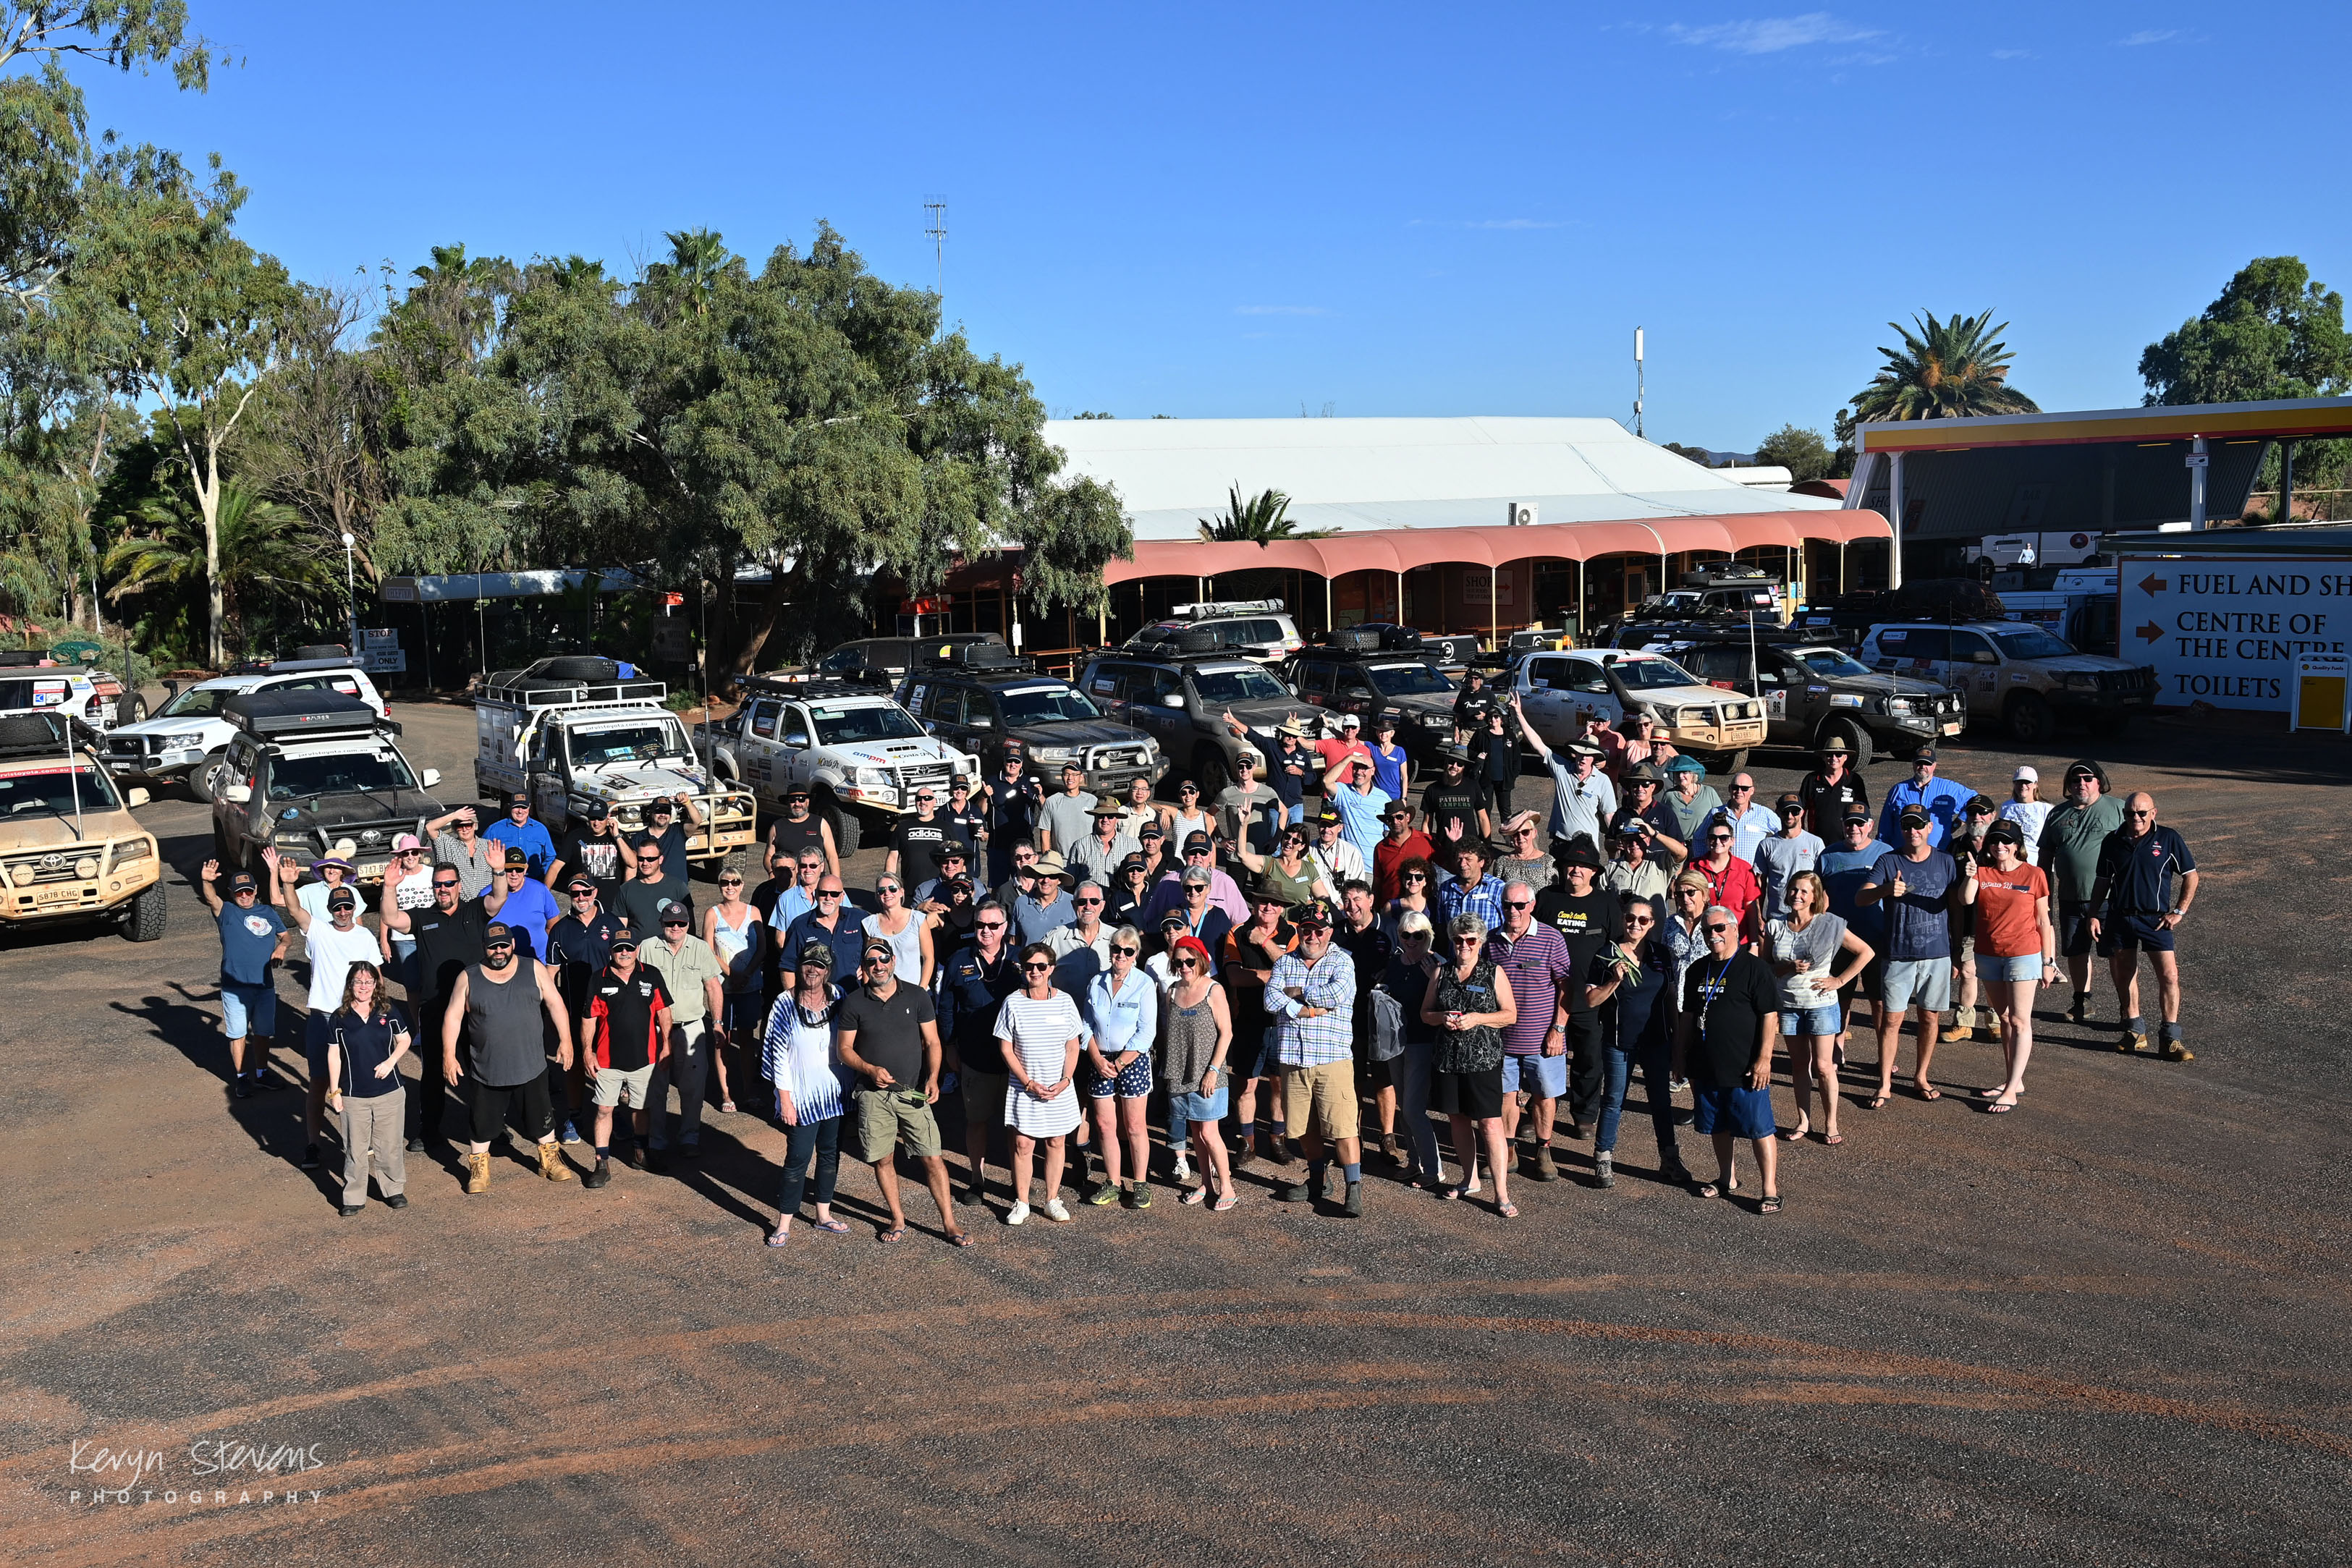 Variety SA 4WD Adventure raised an incredible $876,500 (net) for SA kids in need!